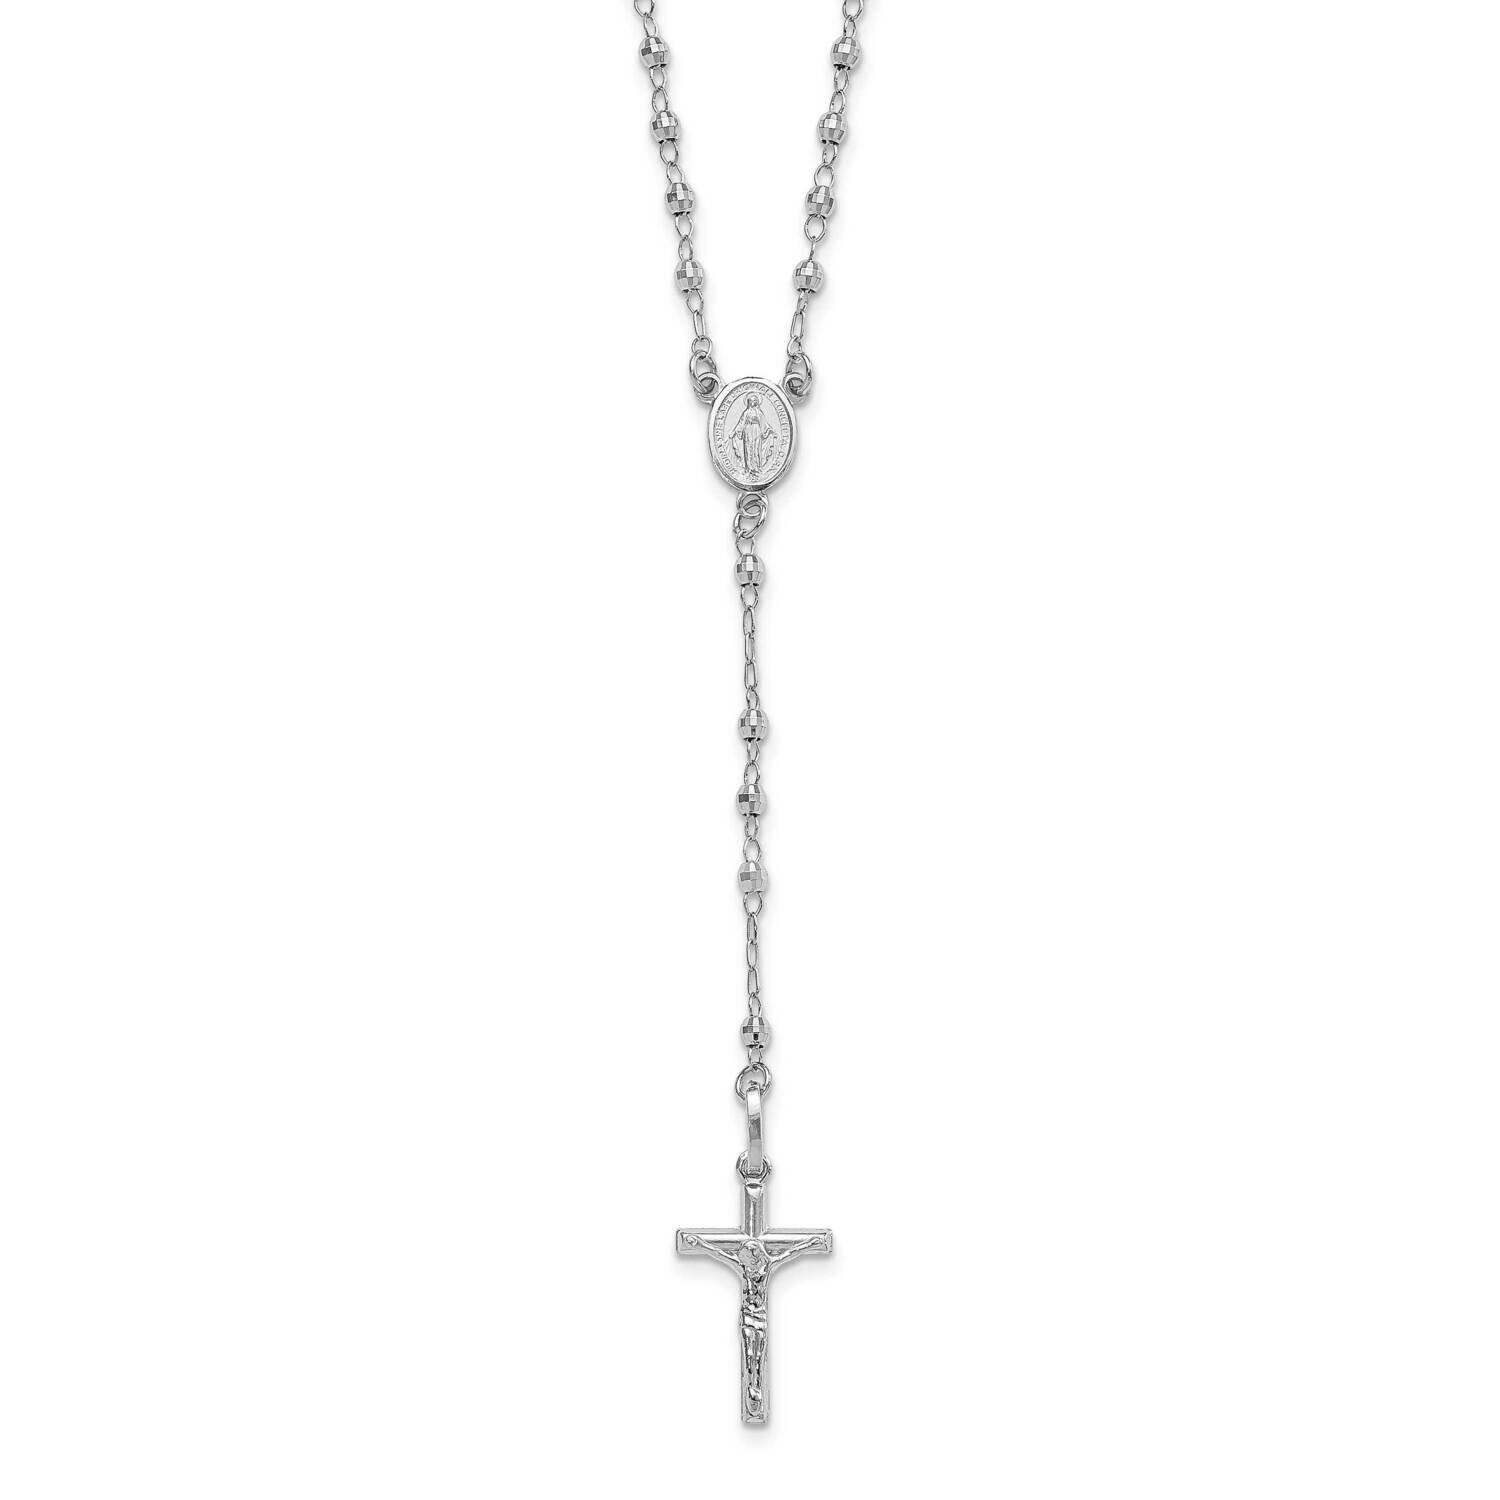 Faceted Beads Rosary Necklace 18 Inch 14k White Gold Polished SF2958W-18